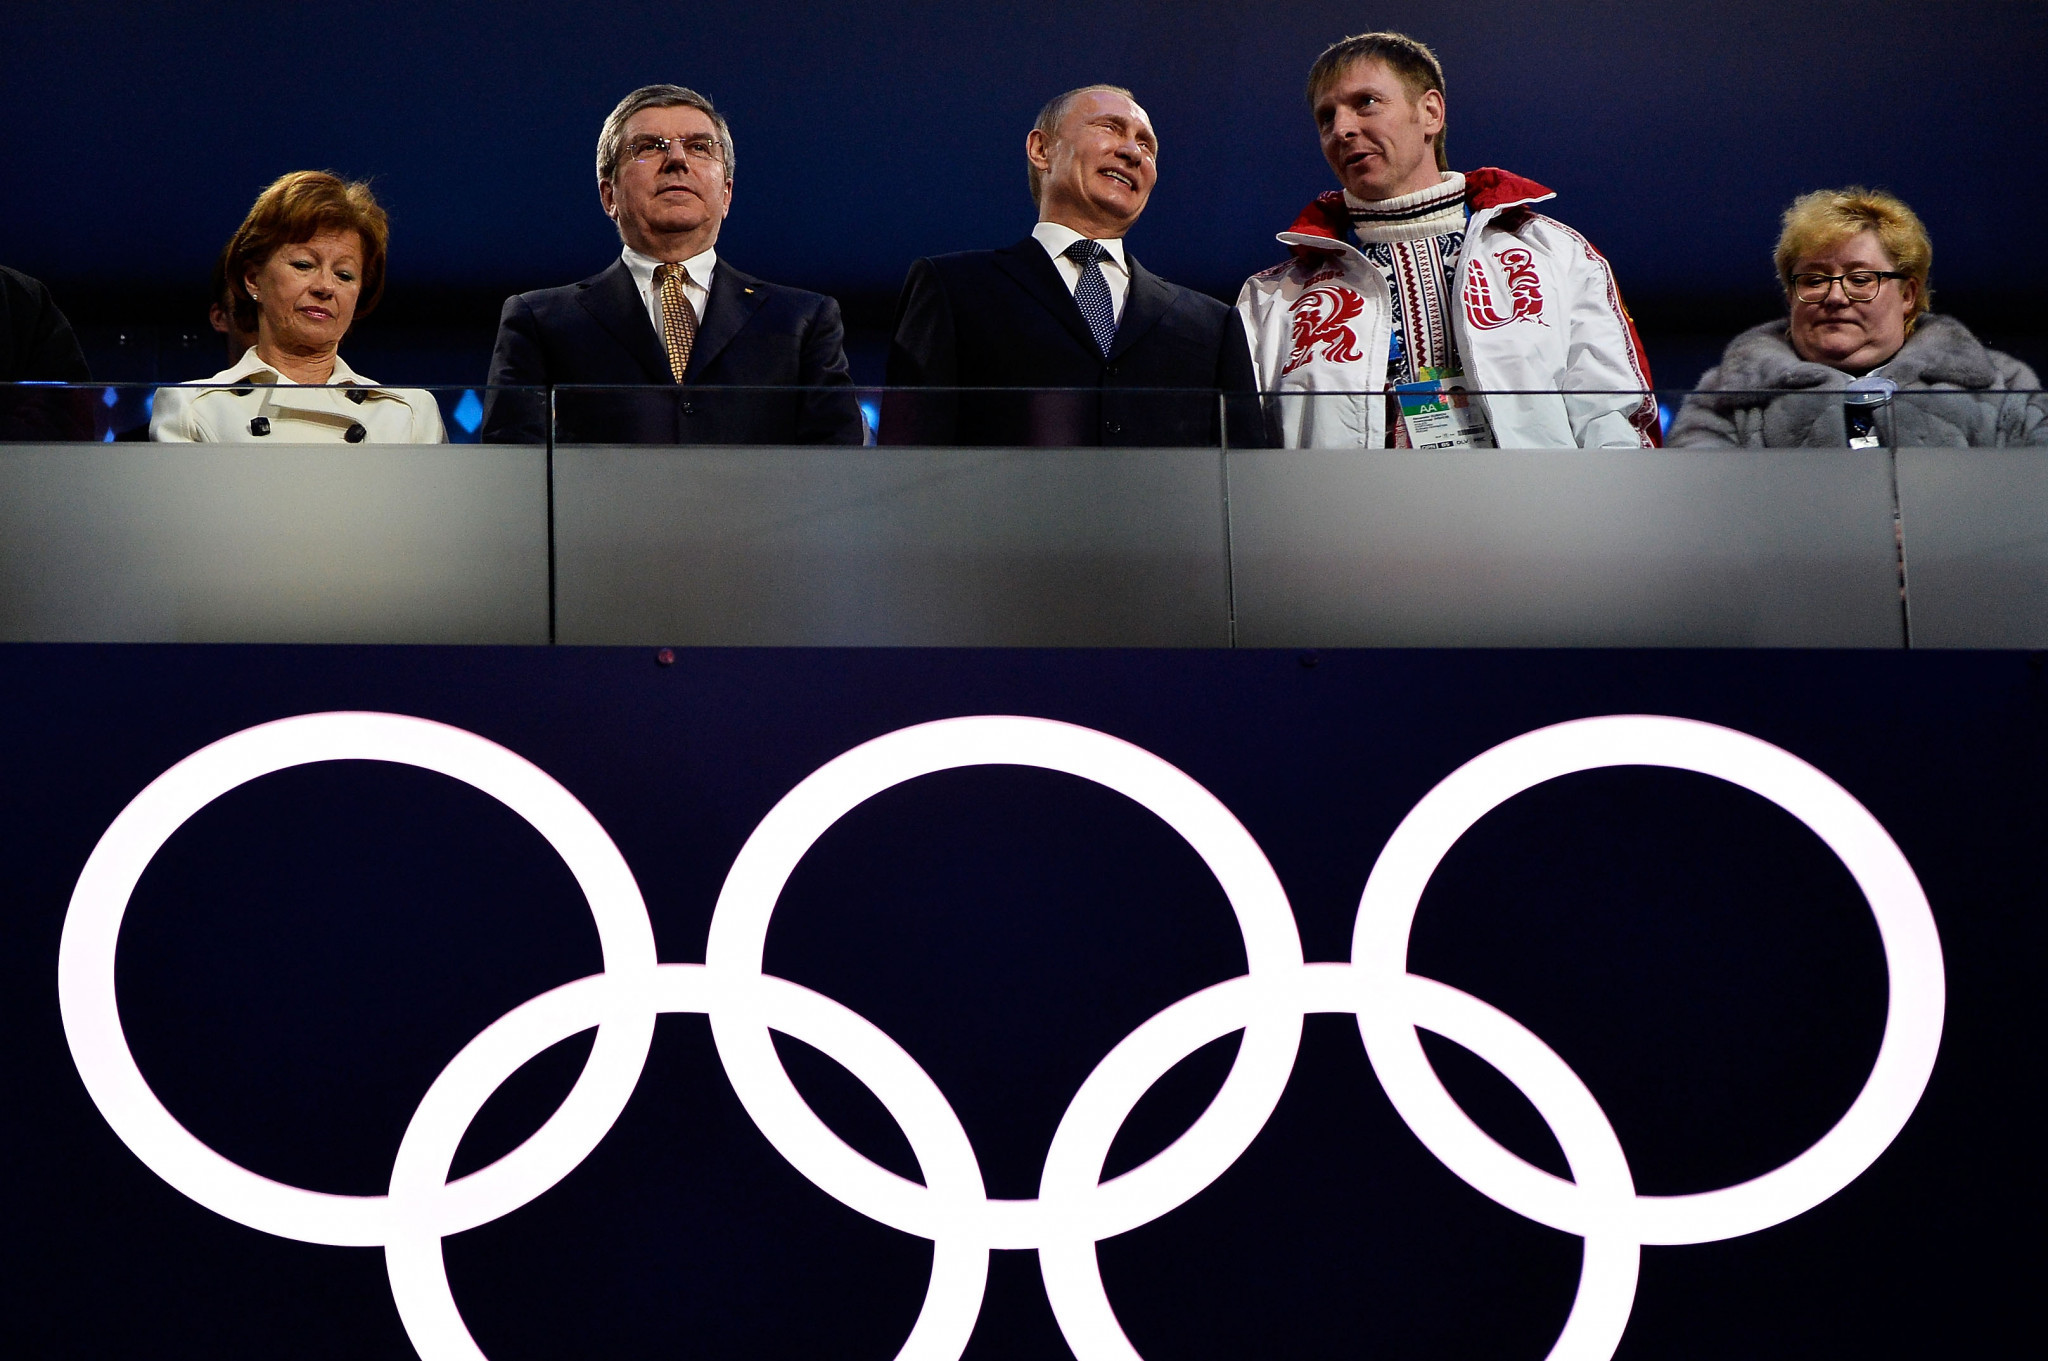 Sochi 2014 was Thomas Bach's, second left, first Olympic Games as IOC President ©Getty Images